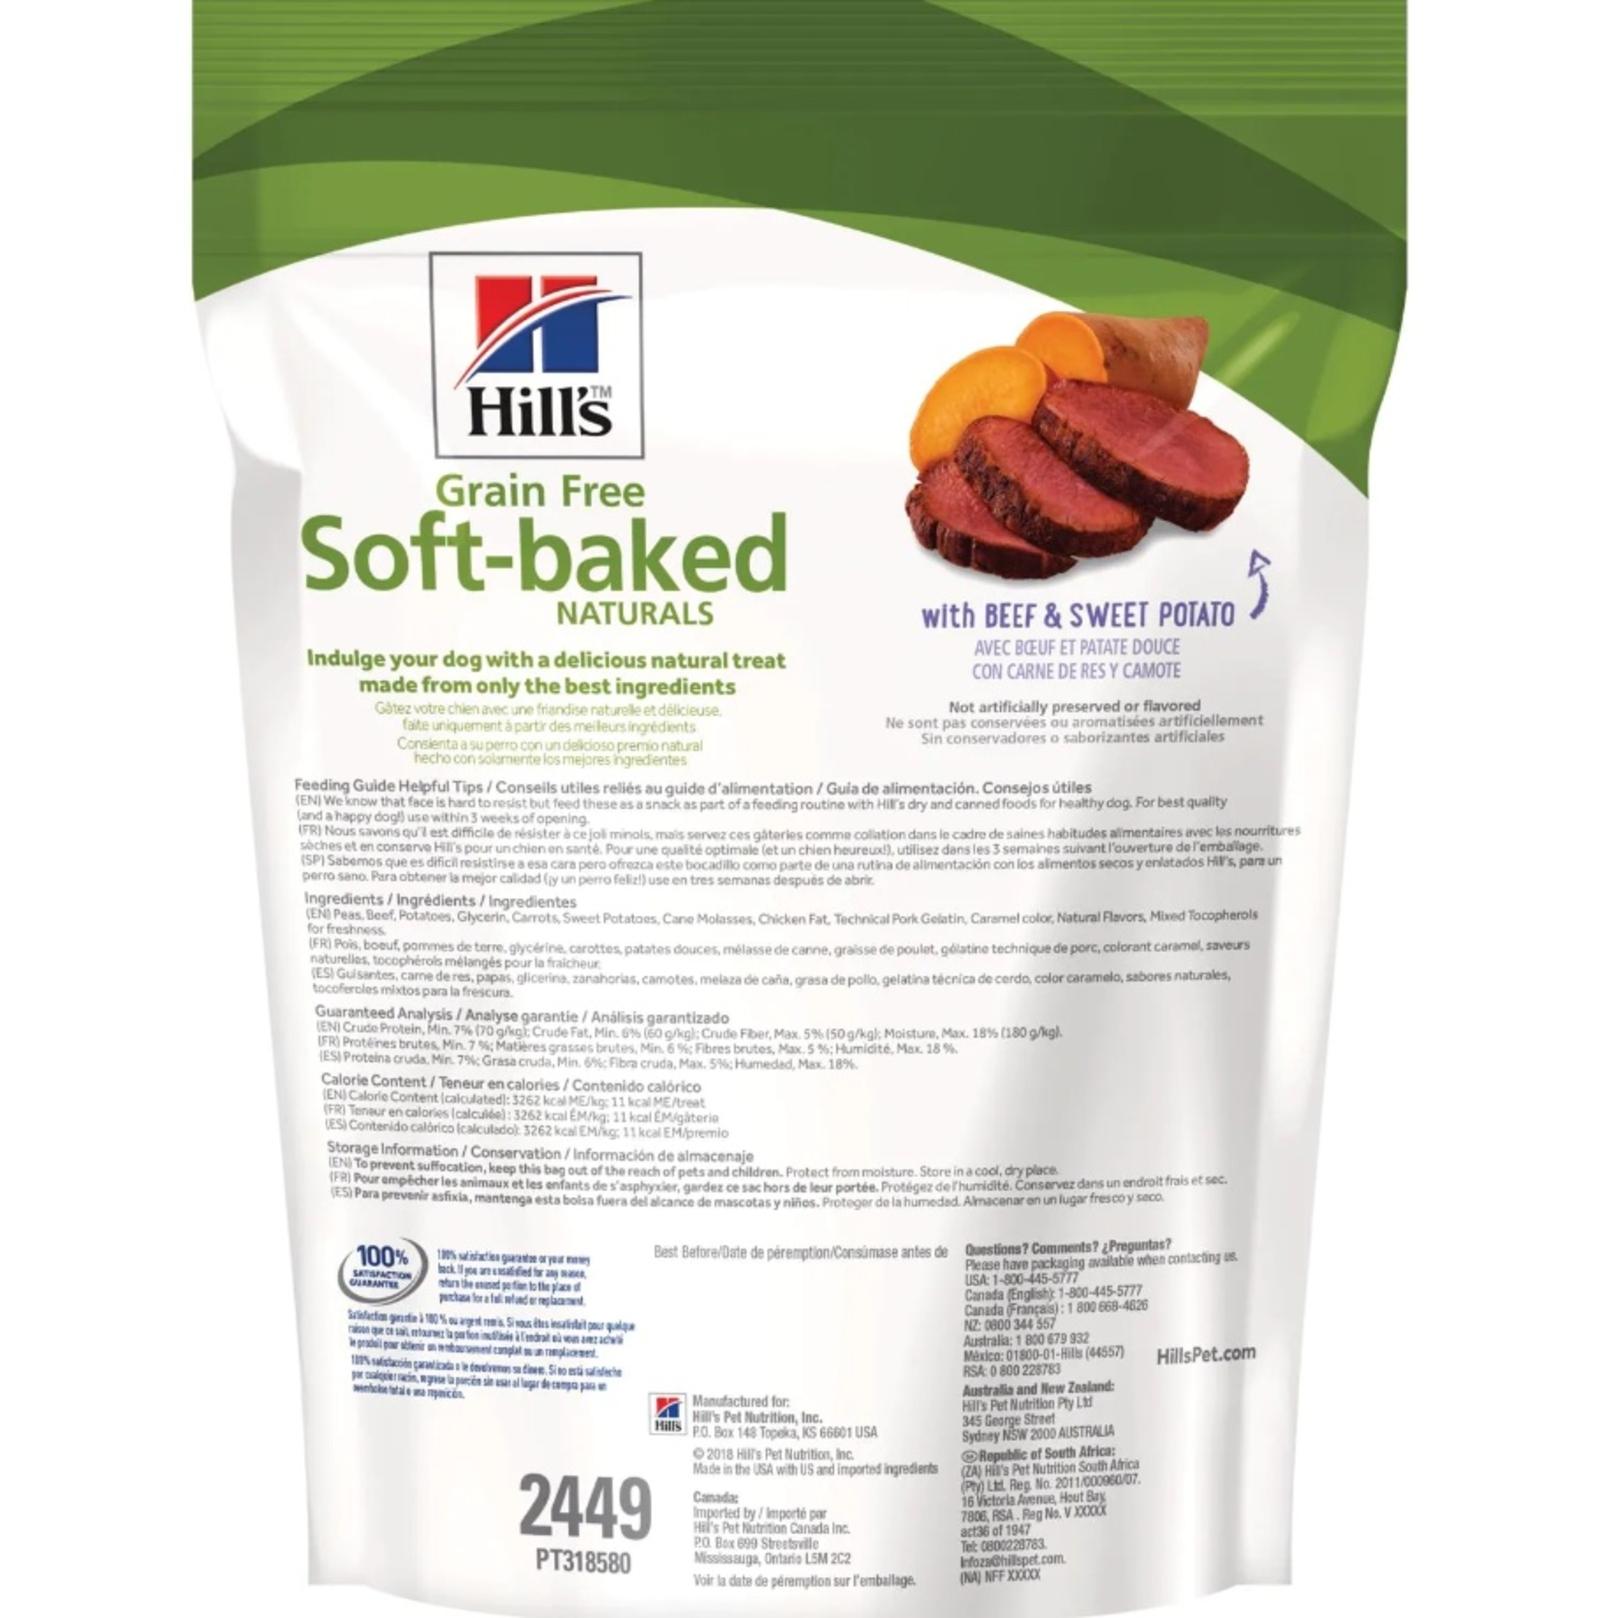 Grain Free Soft-Baked Naturals with Beef & Sweet Potato Dog Treats